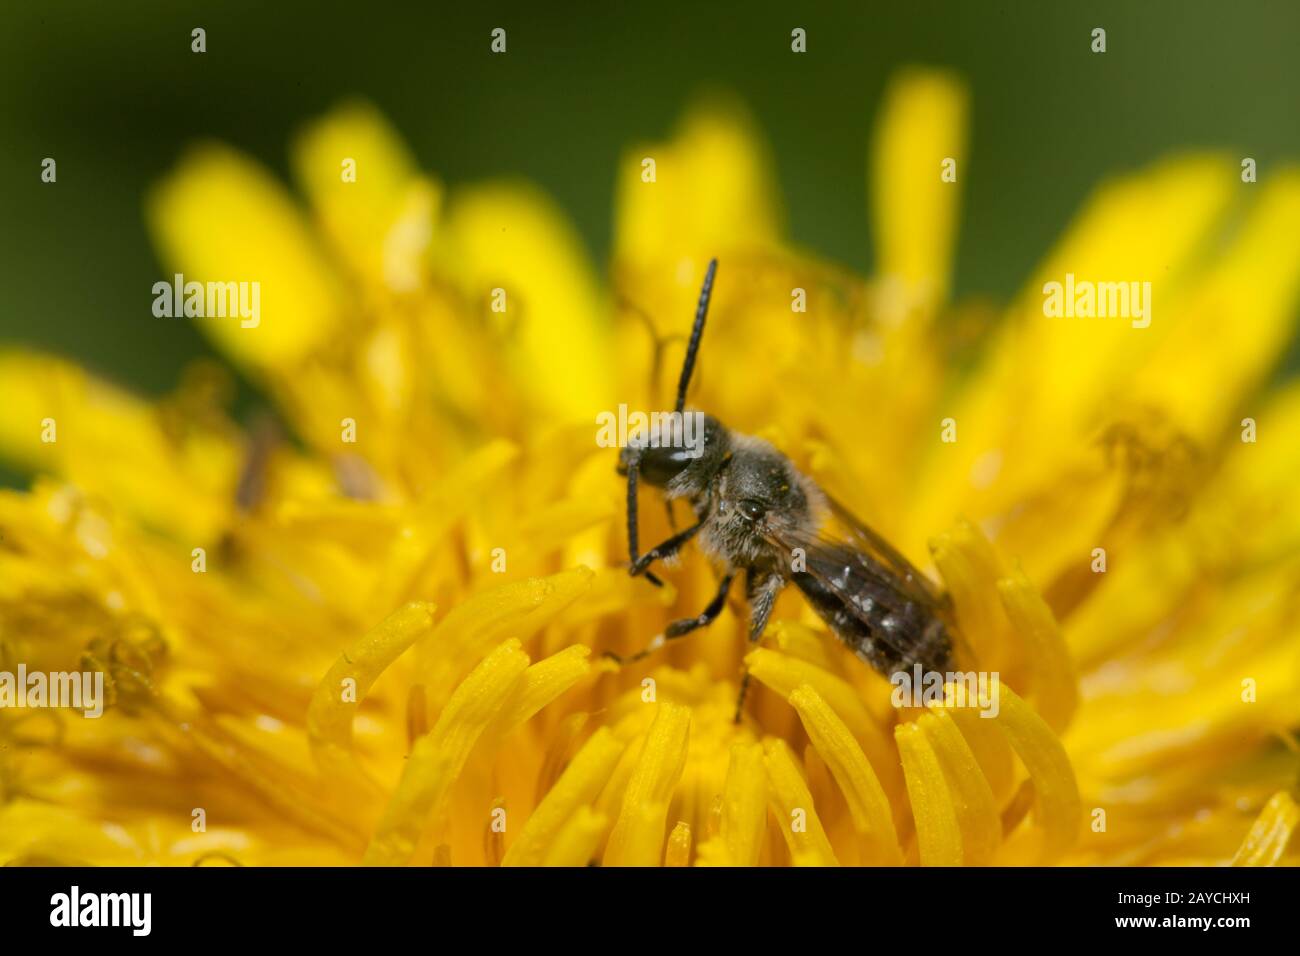 A small solitary bee (family Apidae, genus Lasioglossum) in a dandelion flower Stock Photo